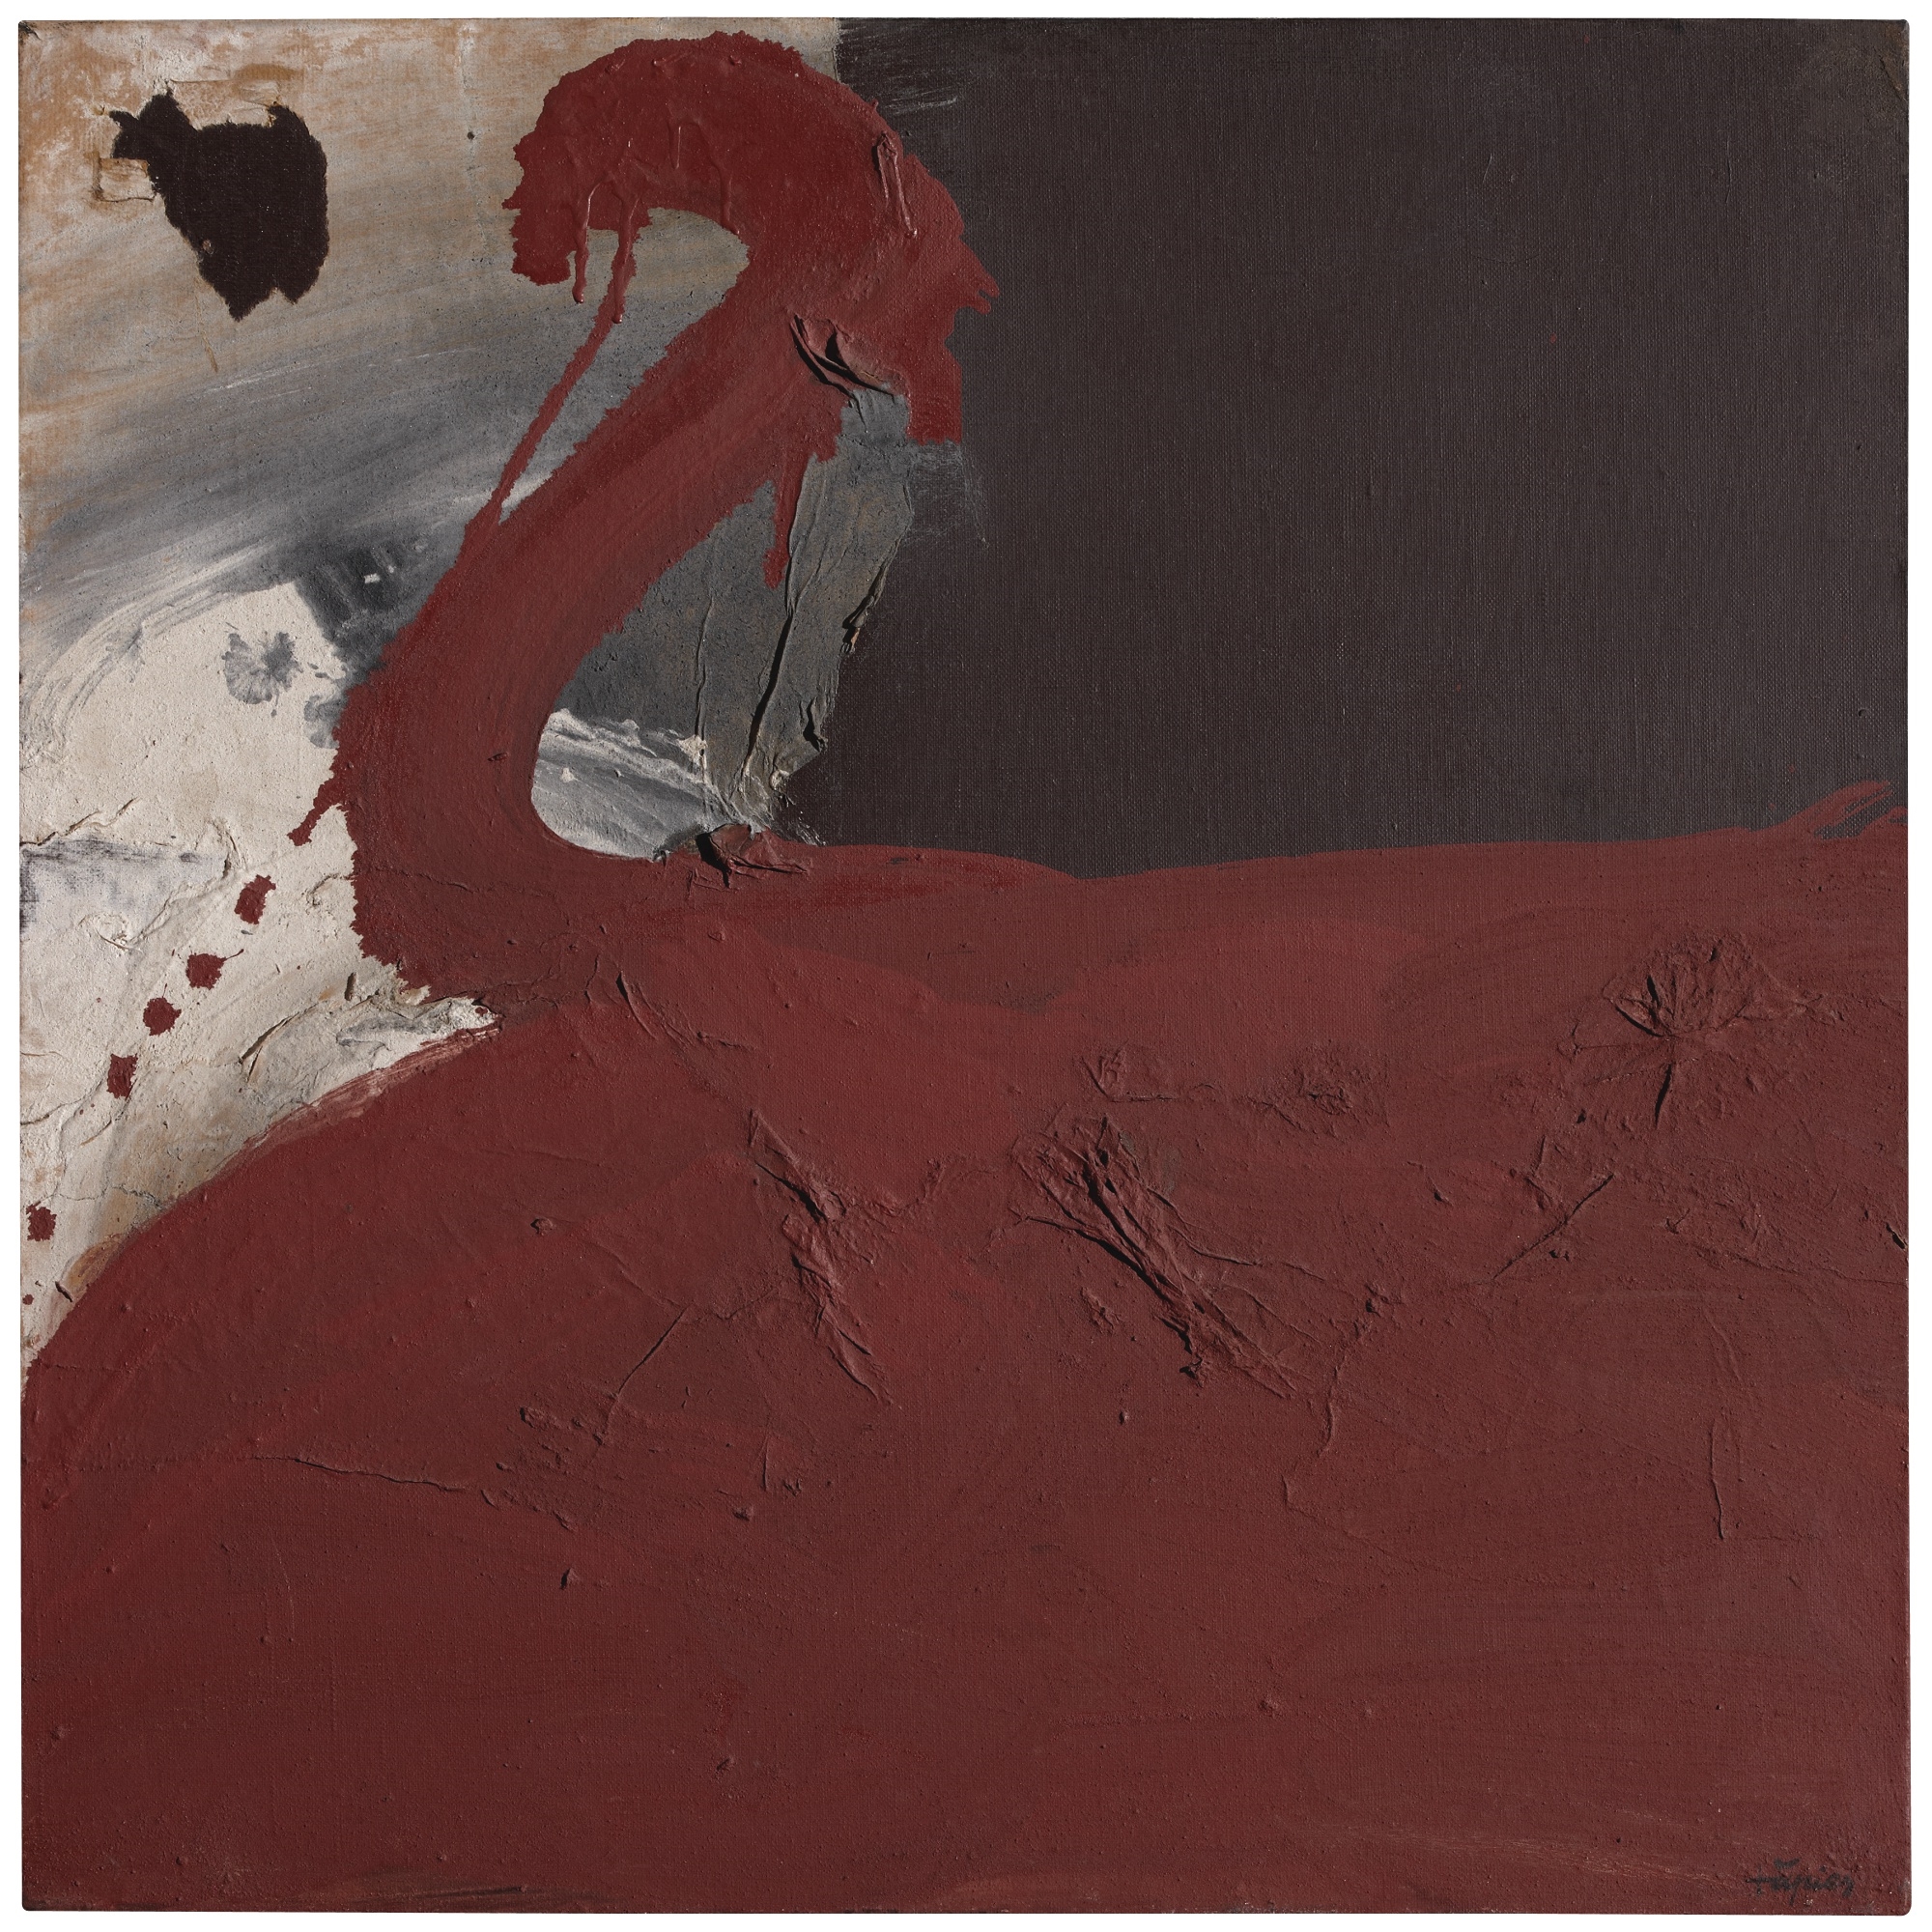 PINTURA-COLLAGE ÒXID VERMELL (RUSTY RED PAINTING-COLLAGE) by Antoni Tàpies, 1960